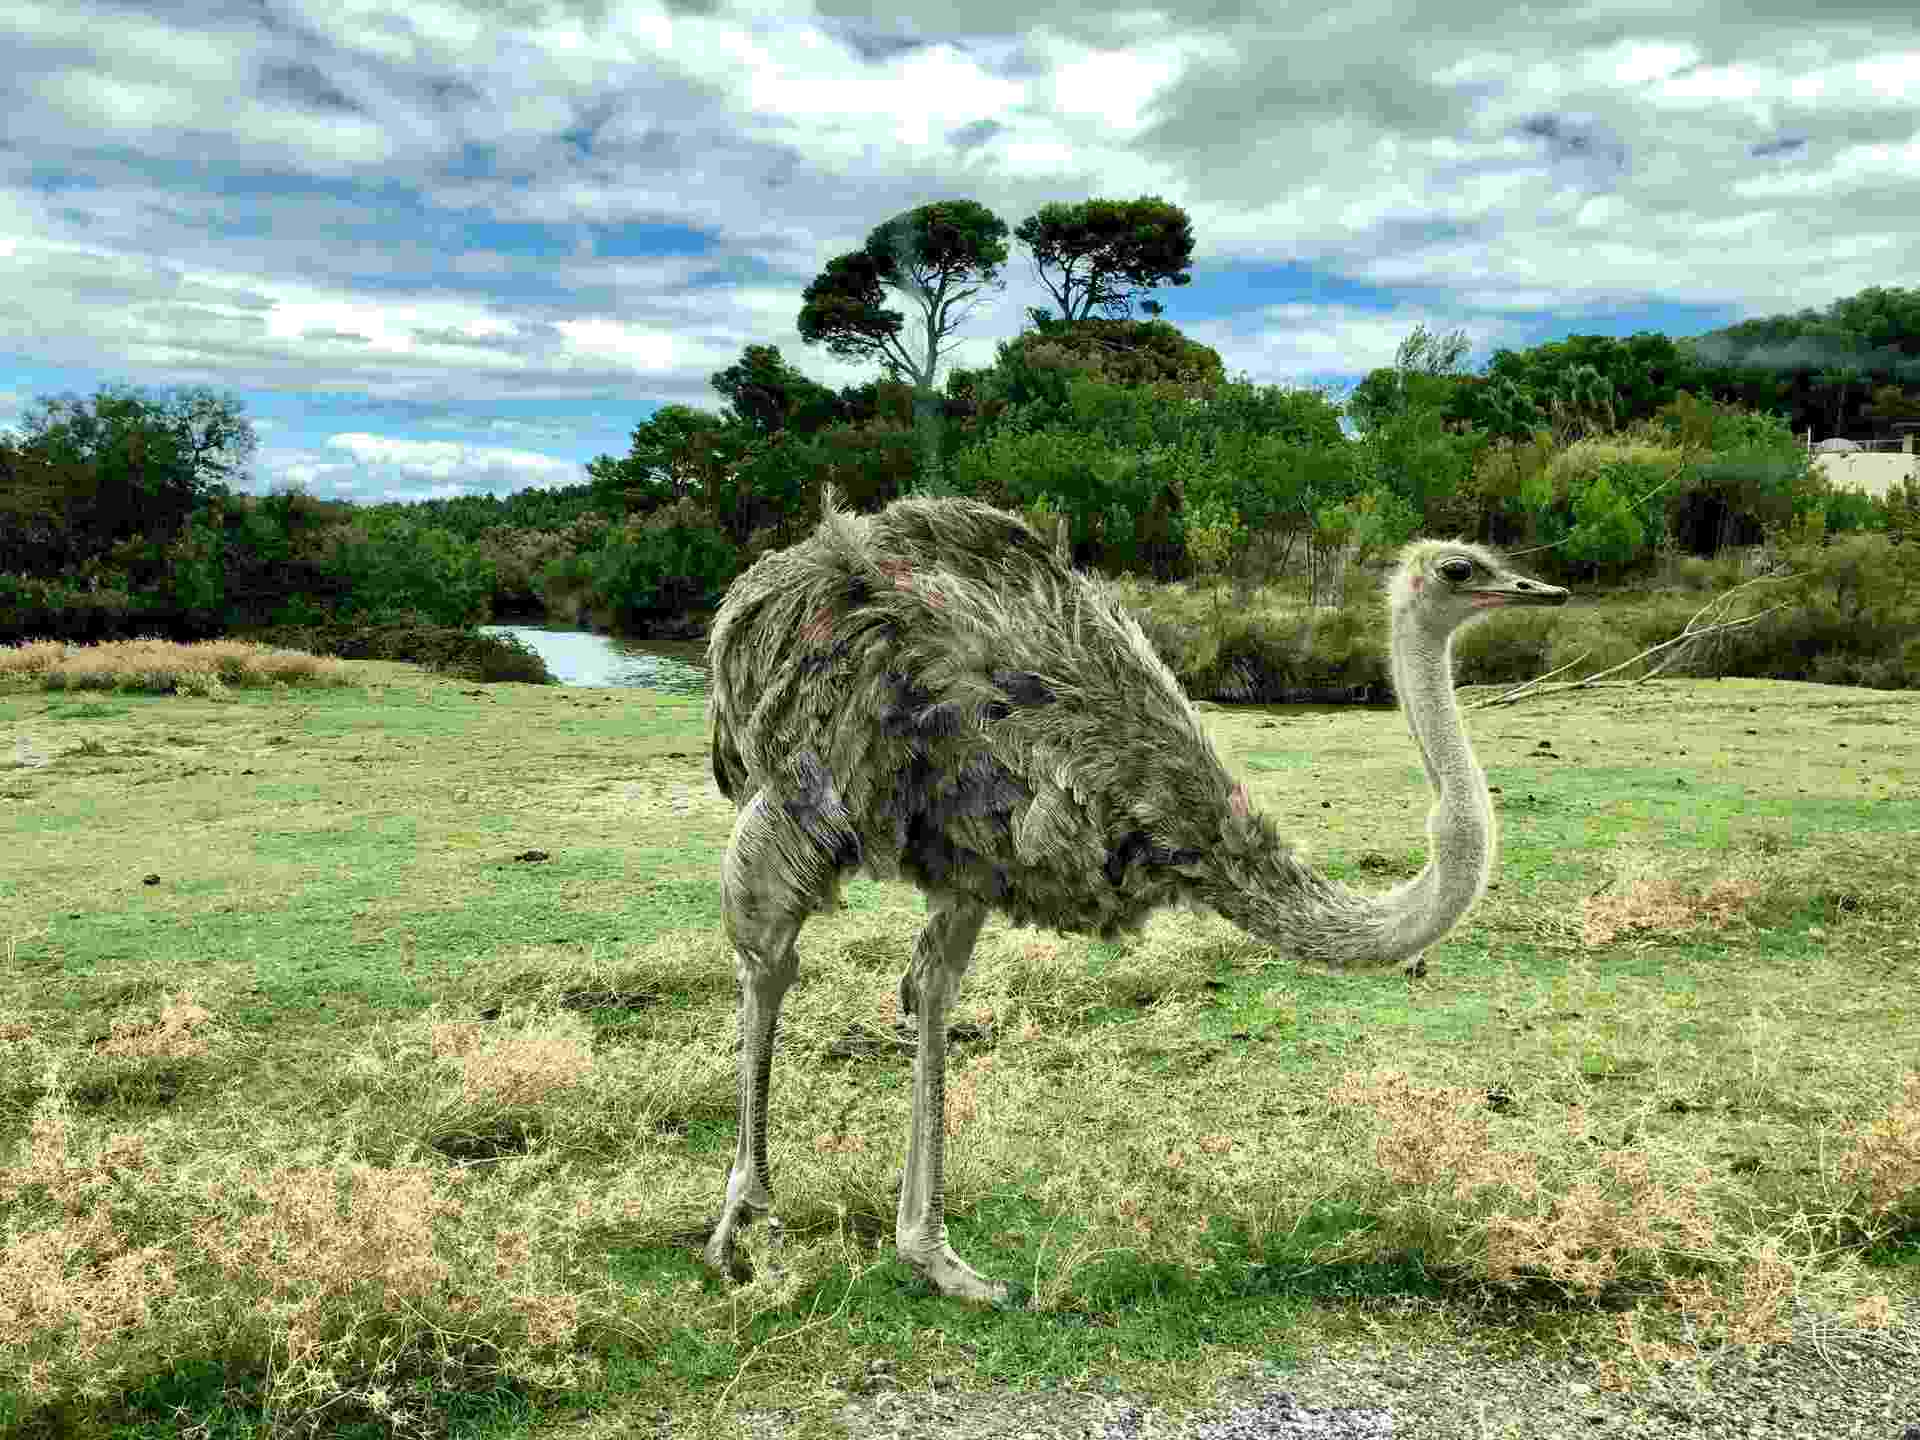 An ostrich is easily recognizable due to its extraordinarily long legs